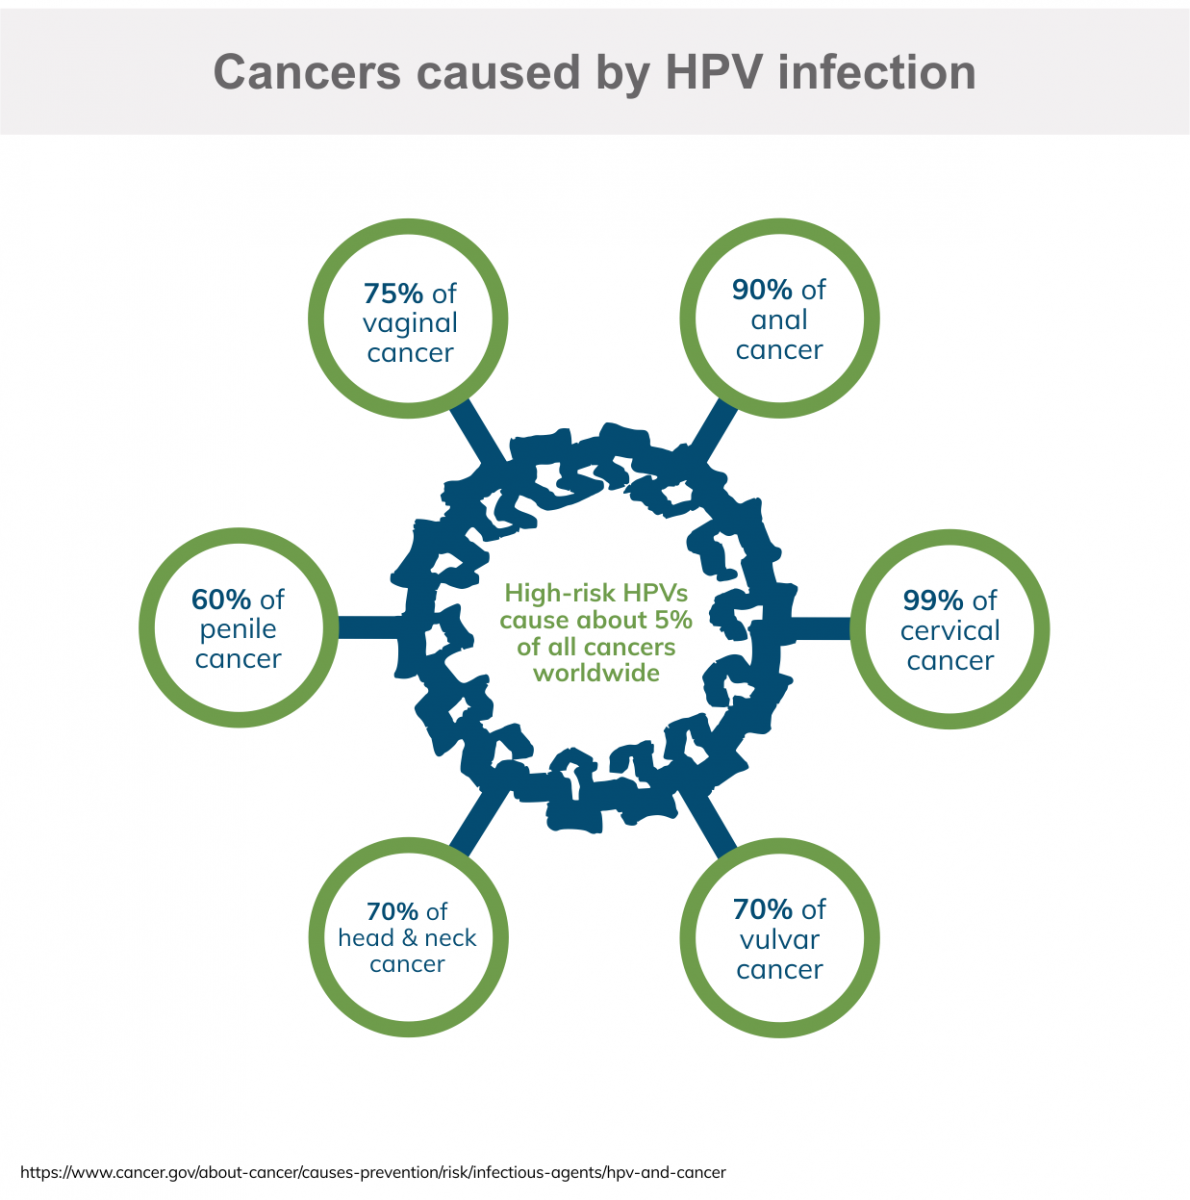 How often hpv causes cancer